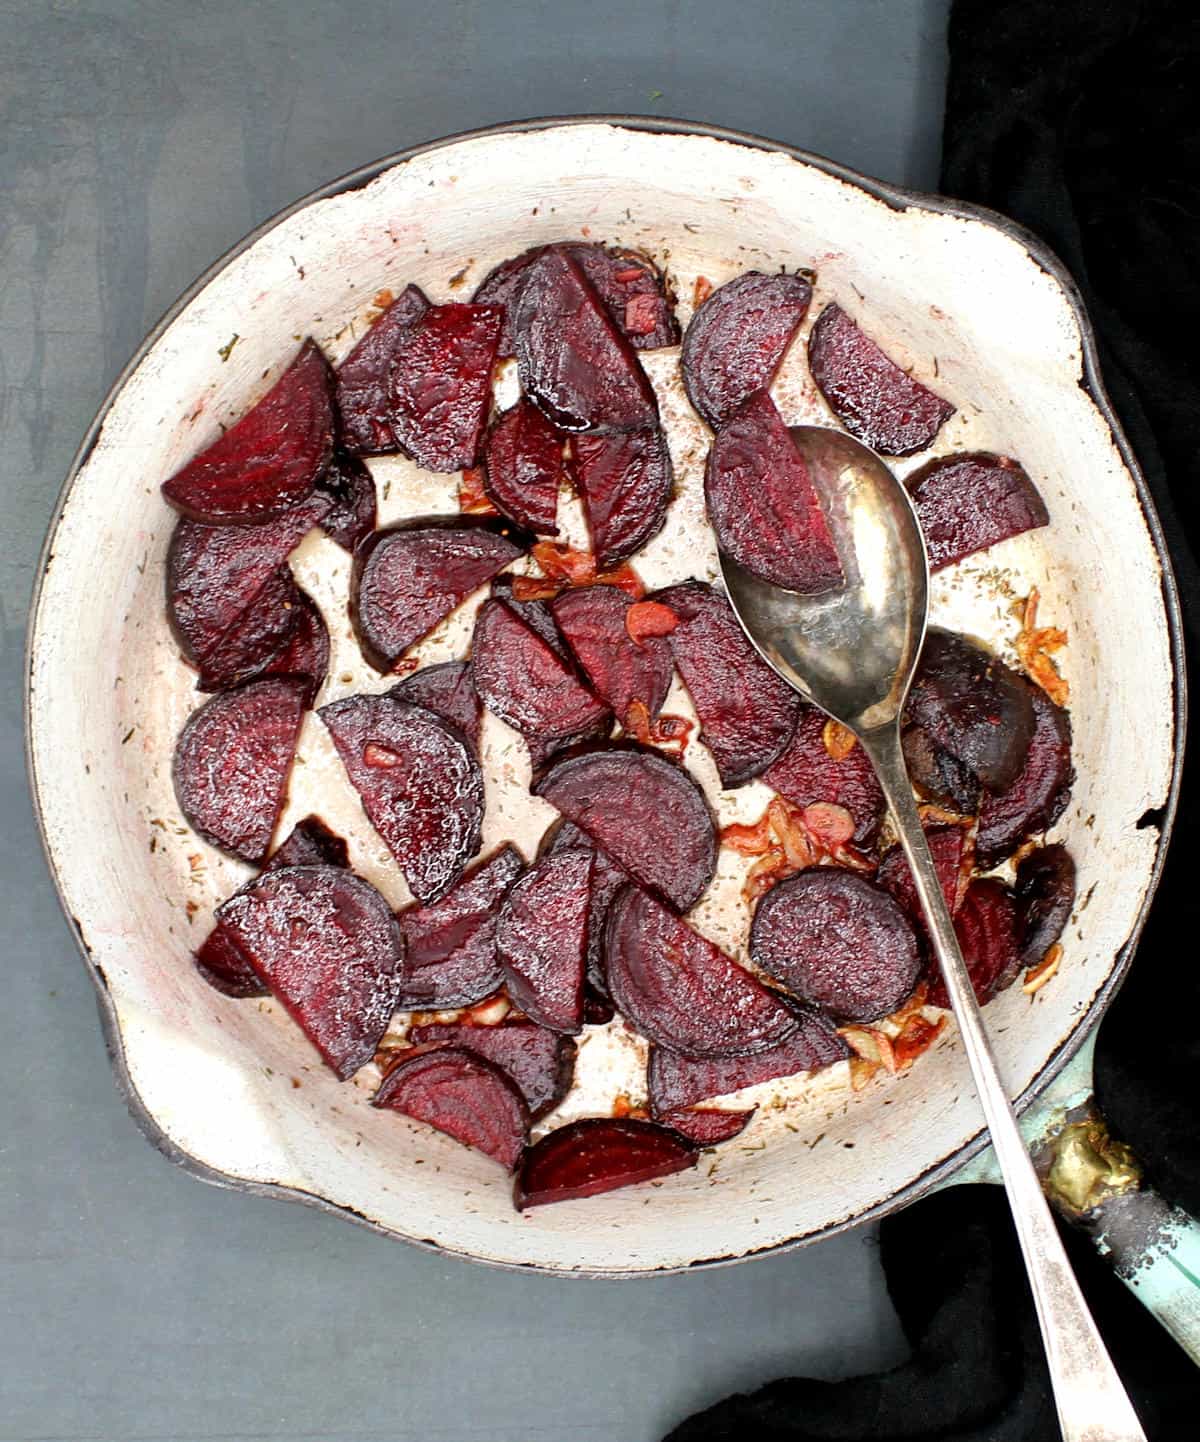 Overhead shot of a skillet with slices of deep red beetroot tossed with garlic and butter and a spoon.